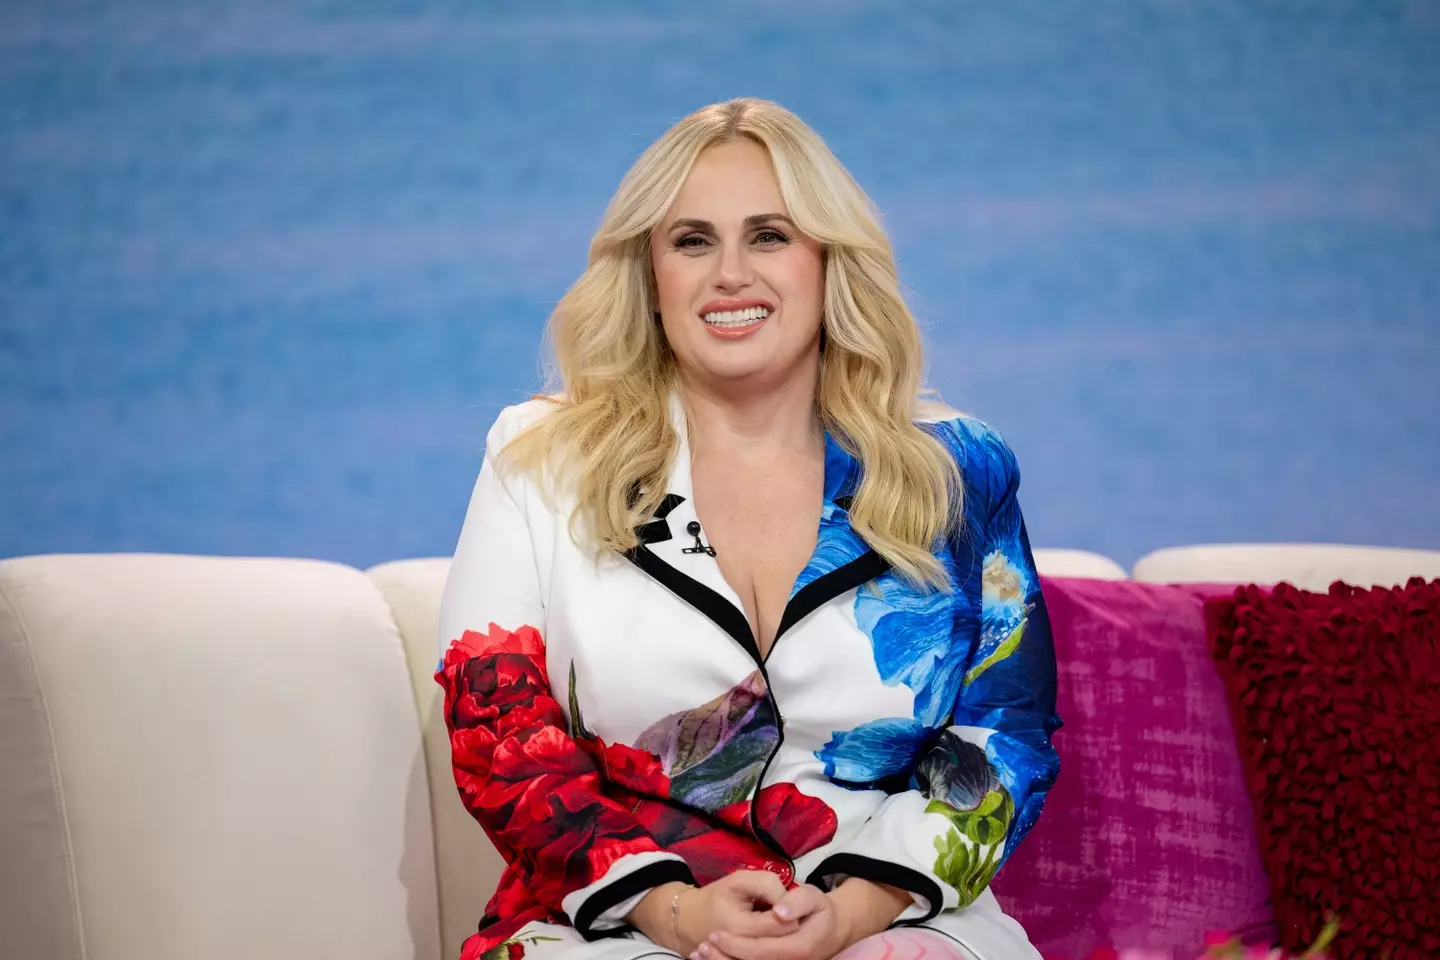 Rebel Wilson was left disappointed with her role. (Universal Pictures)